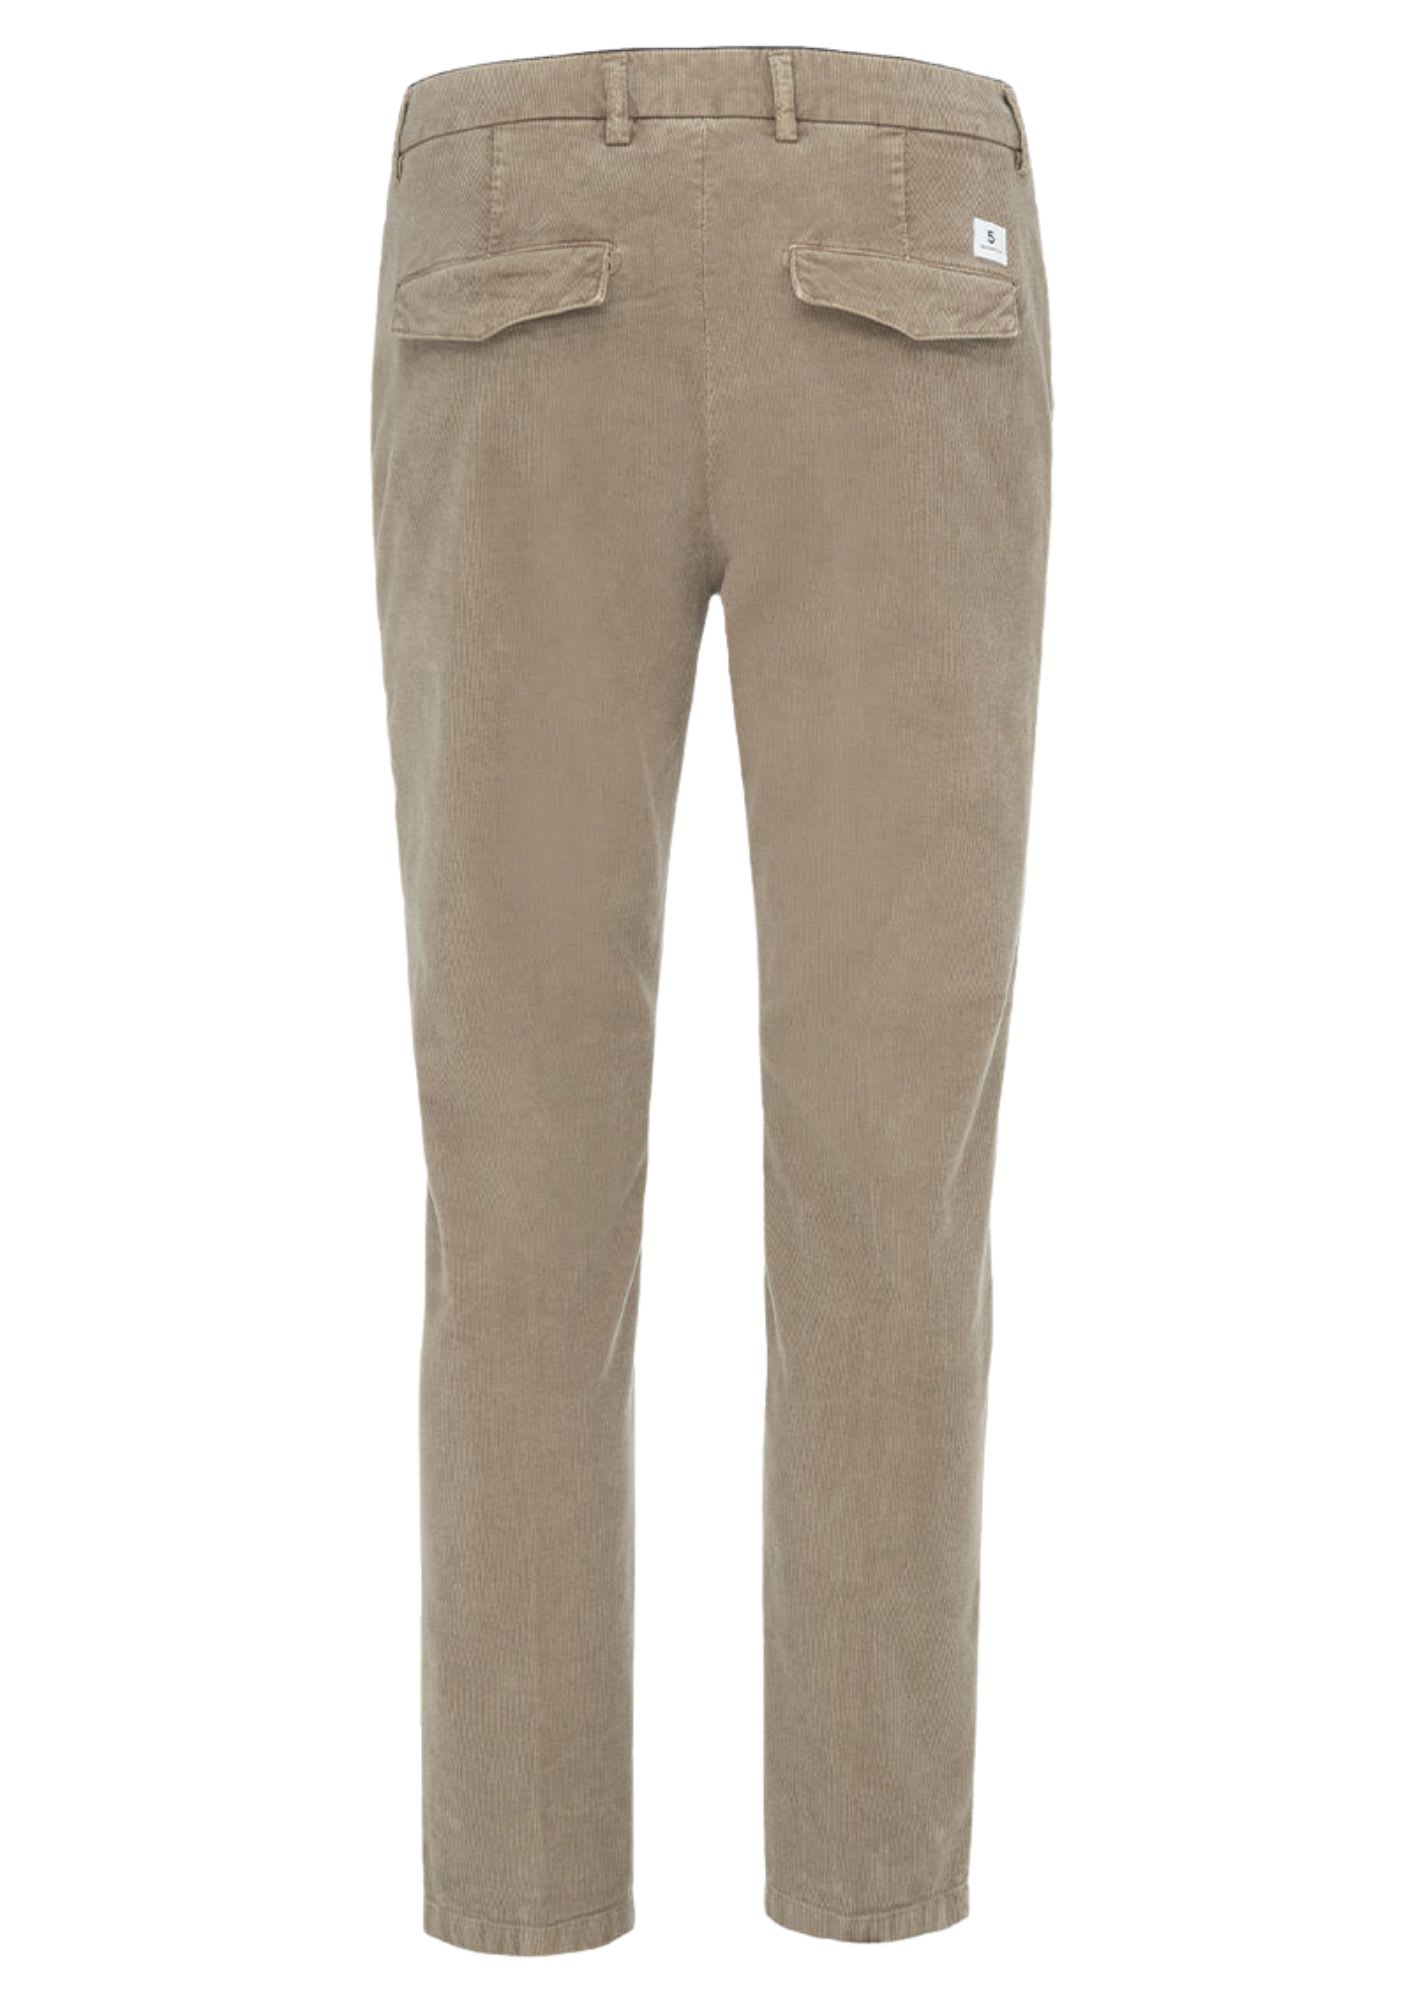 Shop Department Five Prince Pences Chinos In Taupe